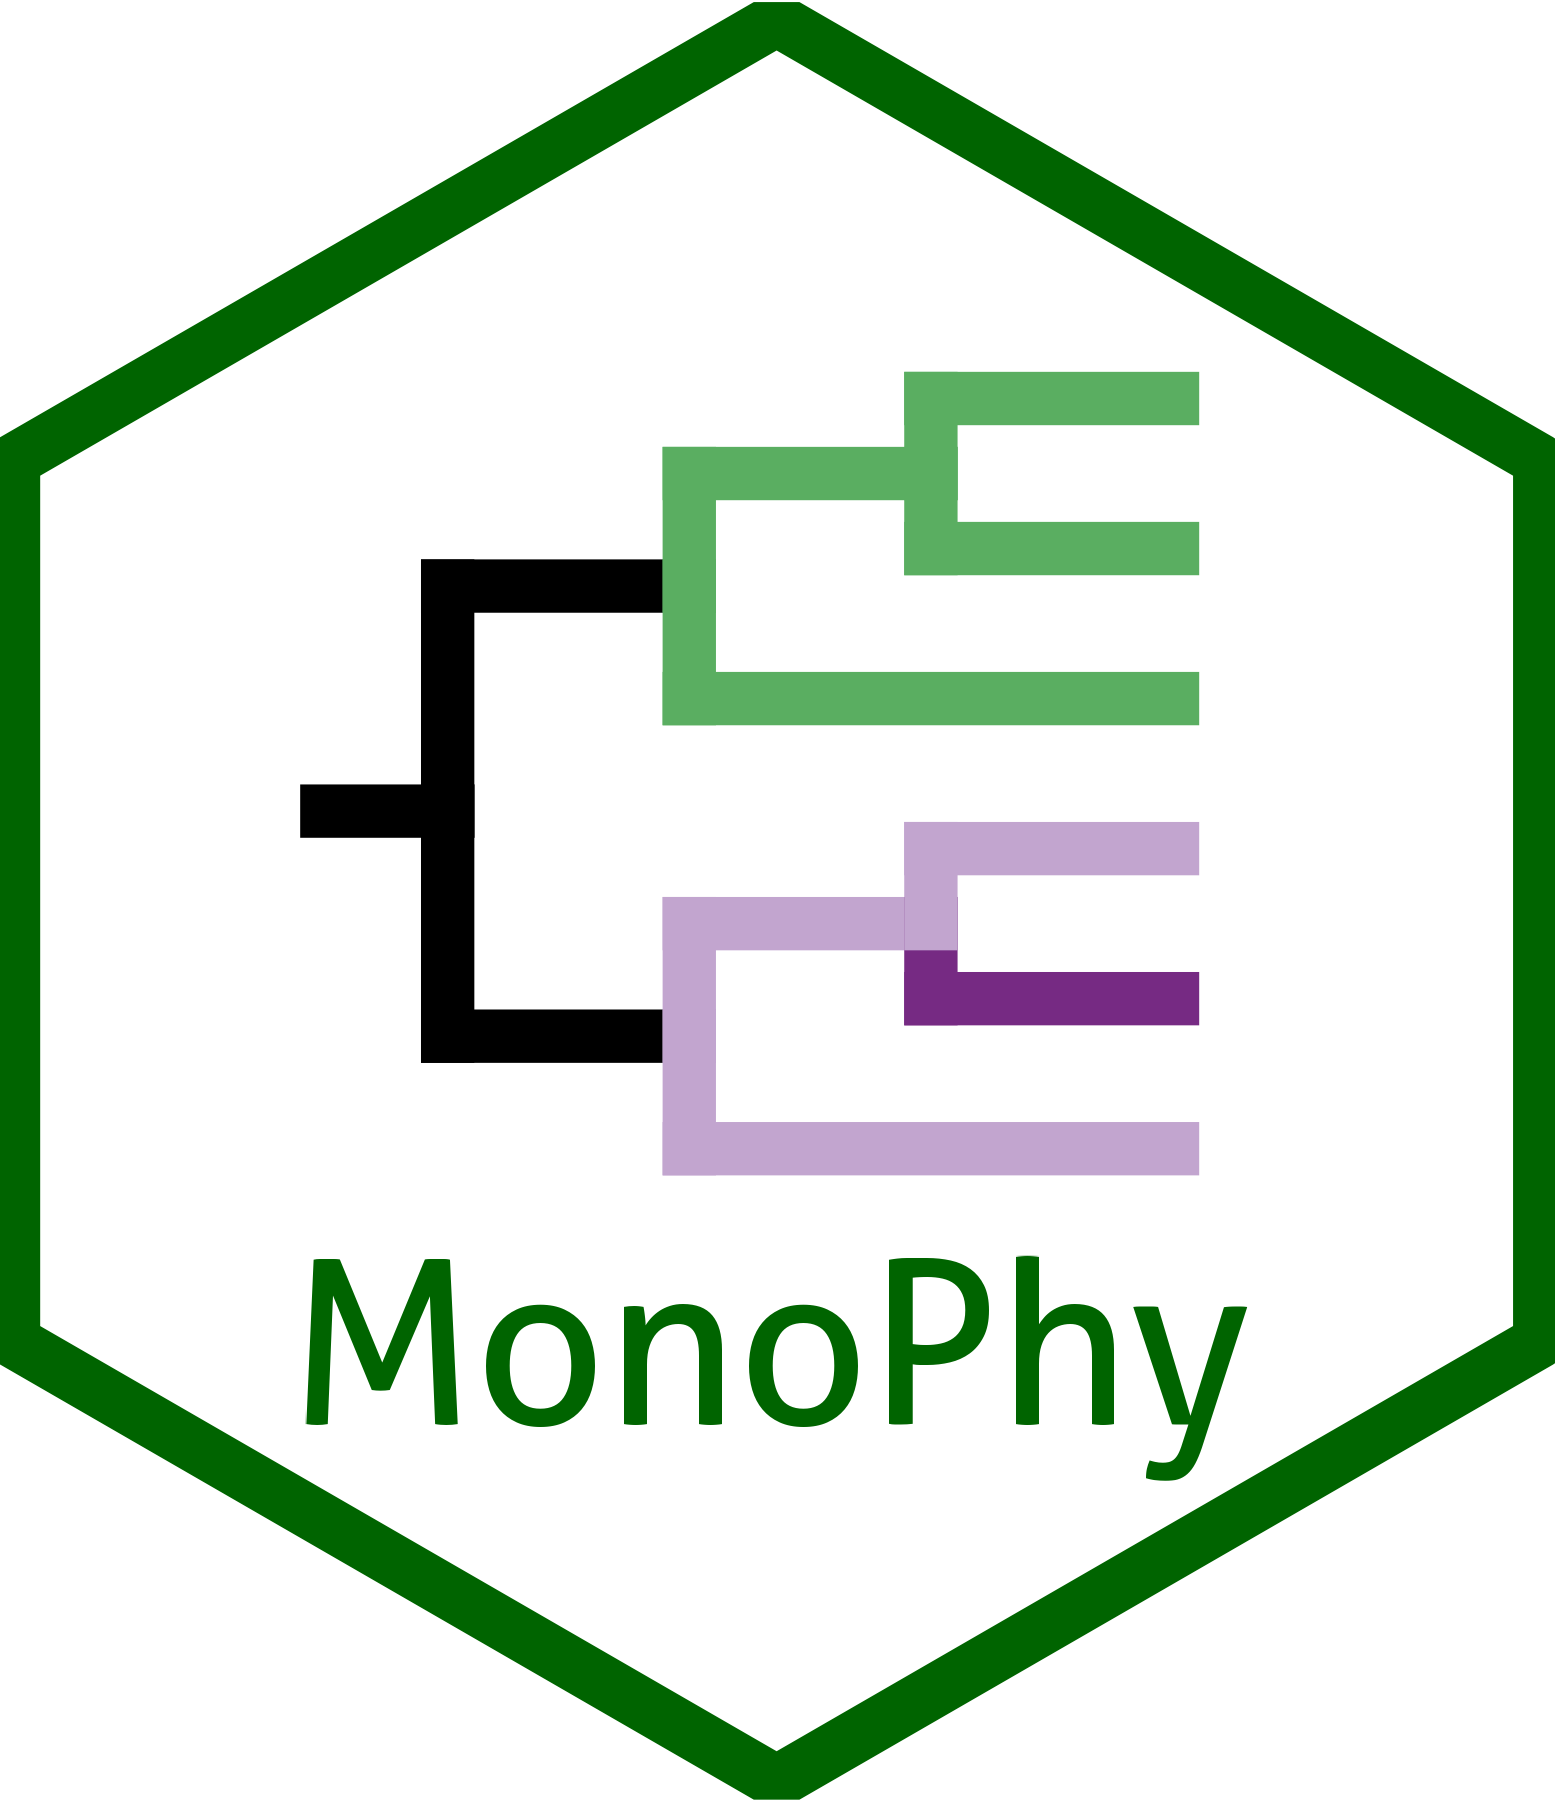 Hex Sticker for R package MonoPhy